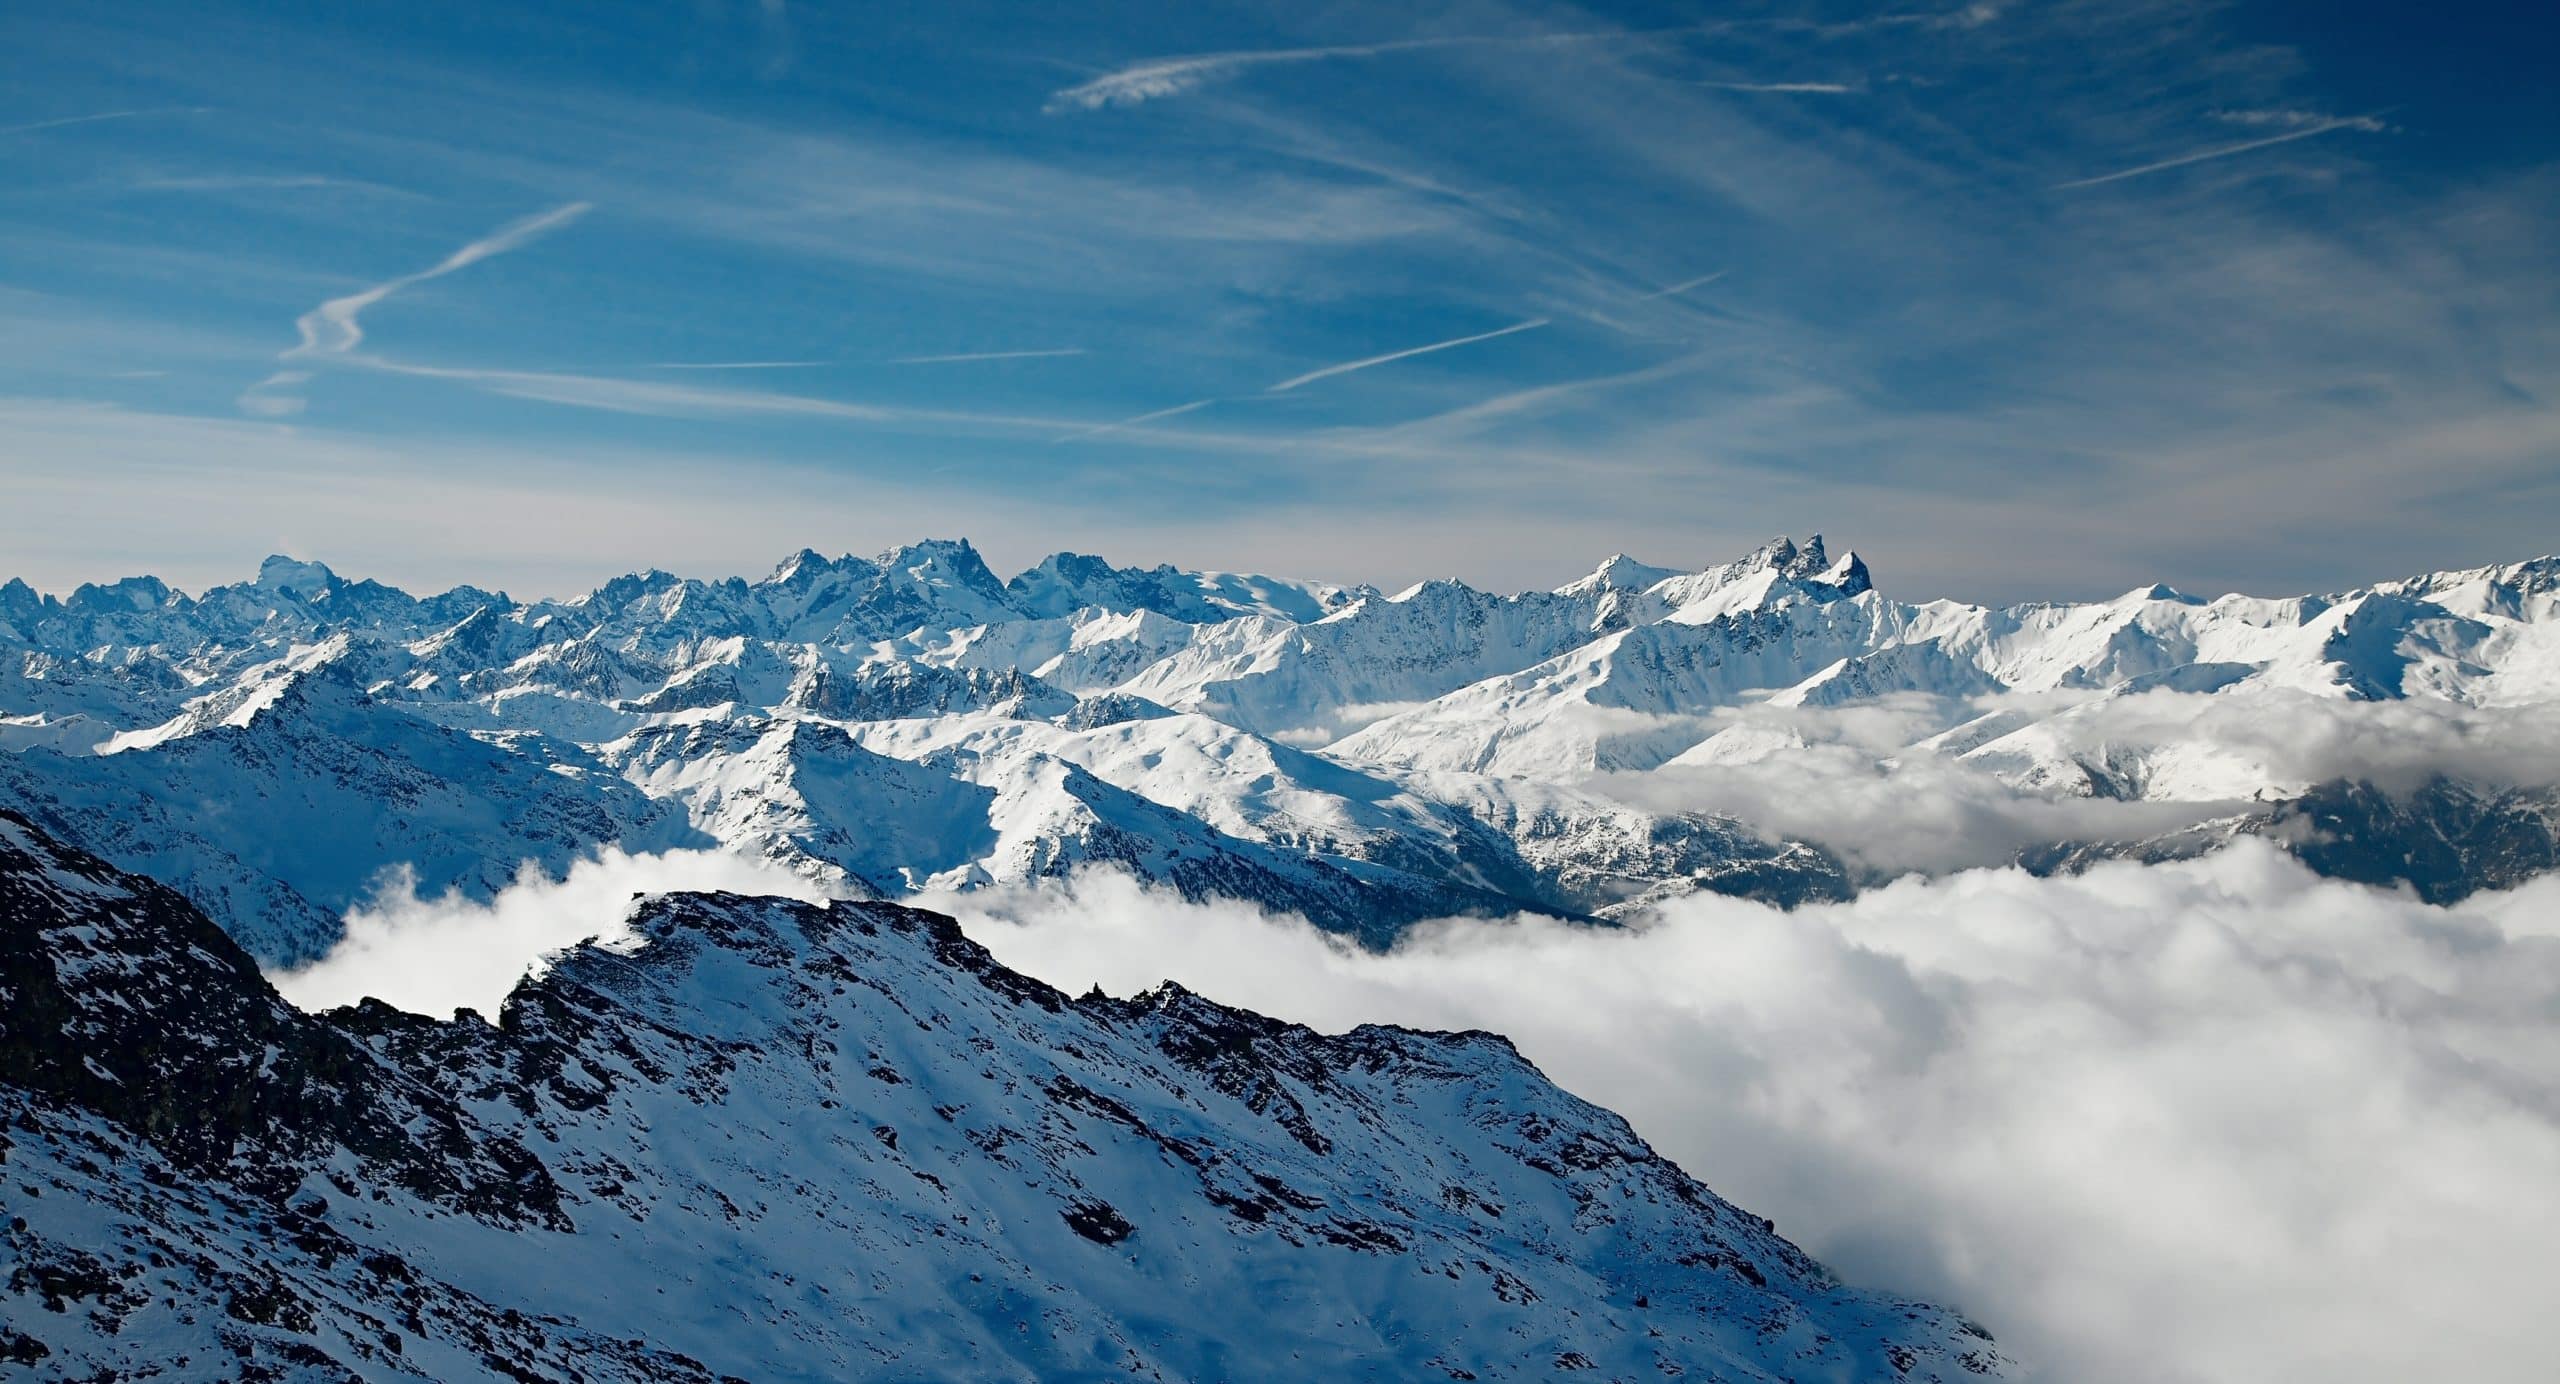 Confidence mounts in French Alps, as savvy buyers look to smaller resorts for deals